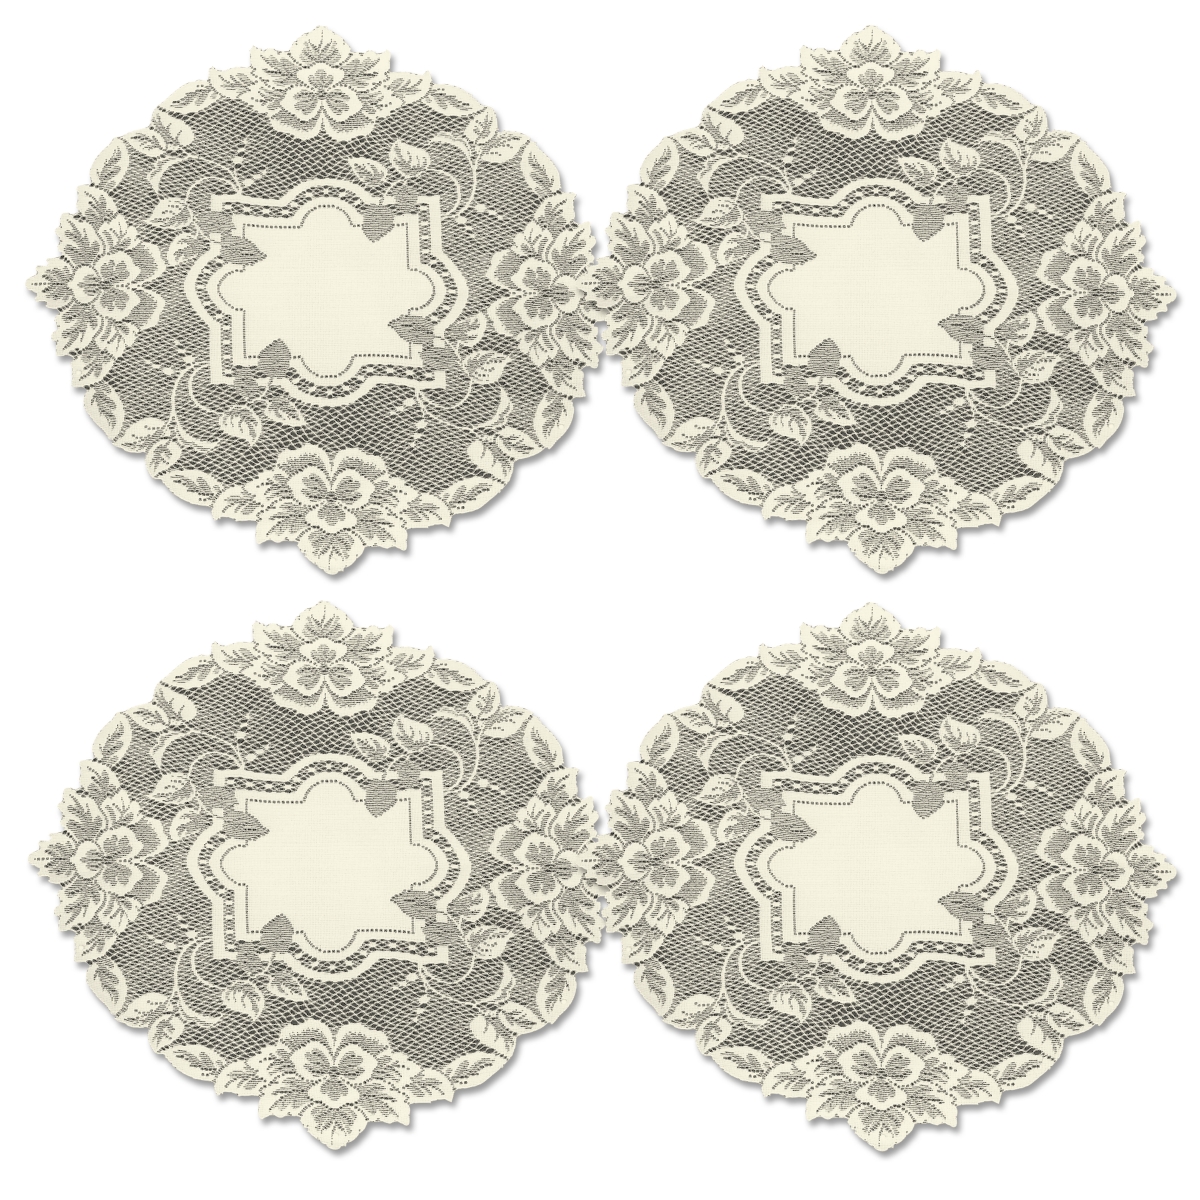 Picture of Heritage Lace HL-1600E-S 16 in. Heirloom Round Doily - Ecru - Set of 4